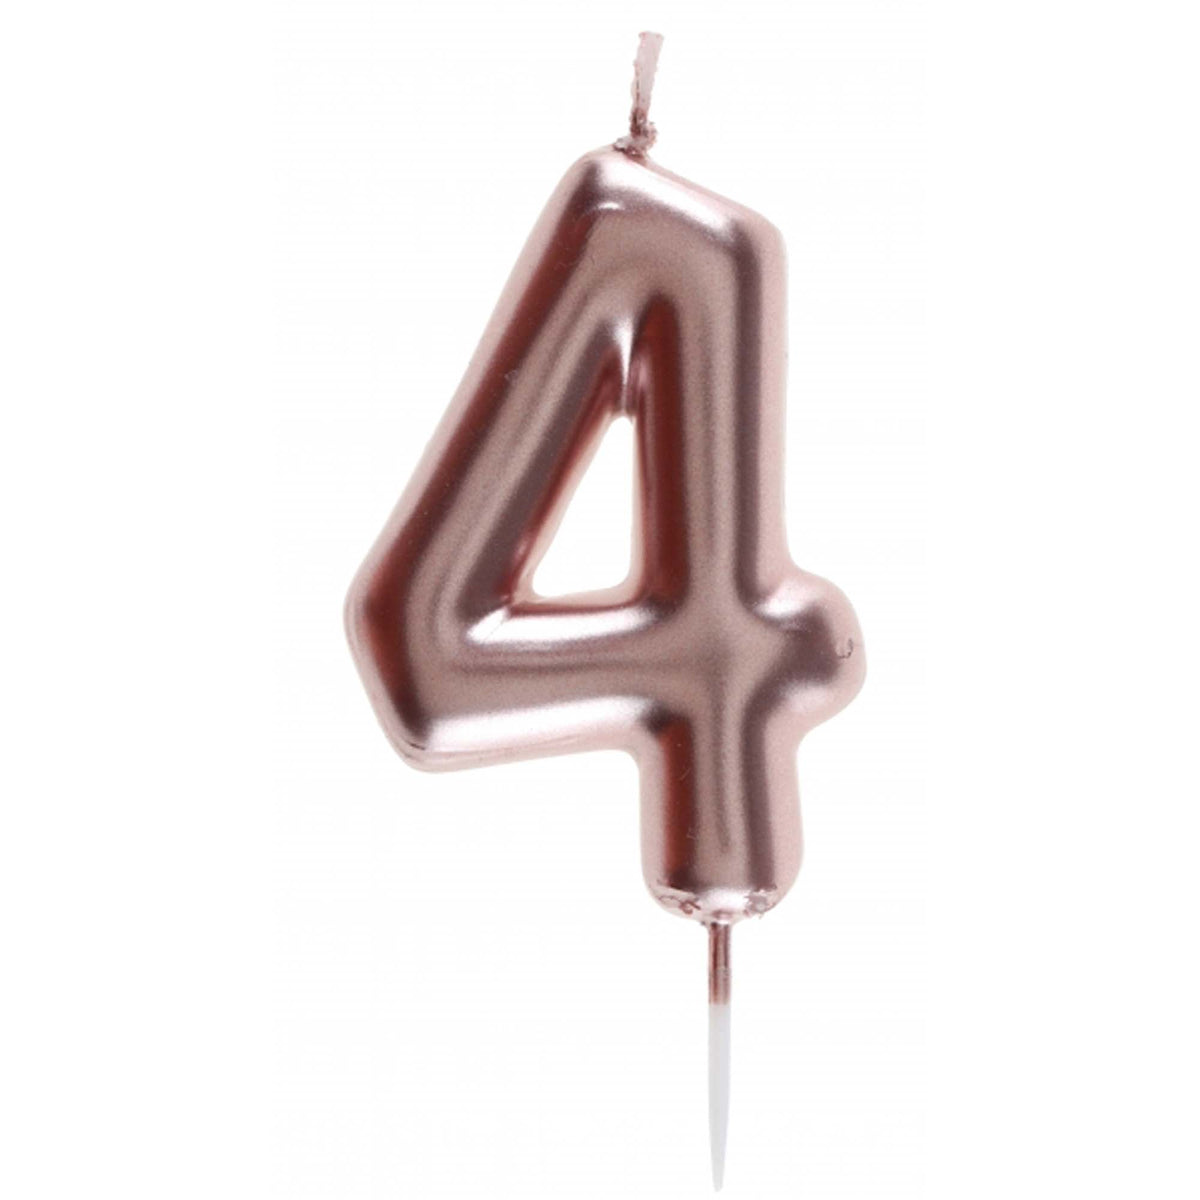 SANTEX Cake Supplies Rose Gold Number 4 Birthday Candle, 1 Count 3660380068815